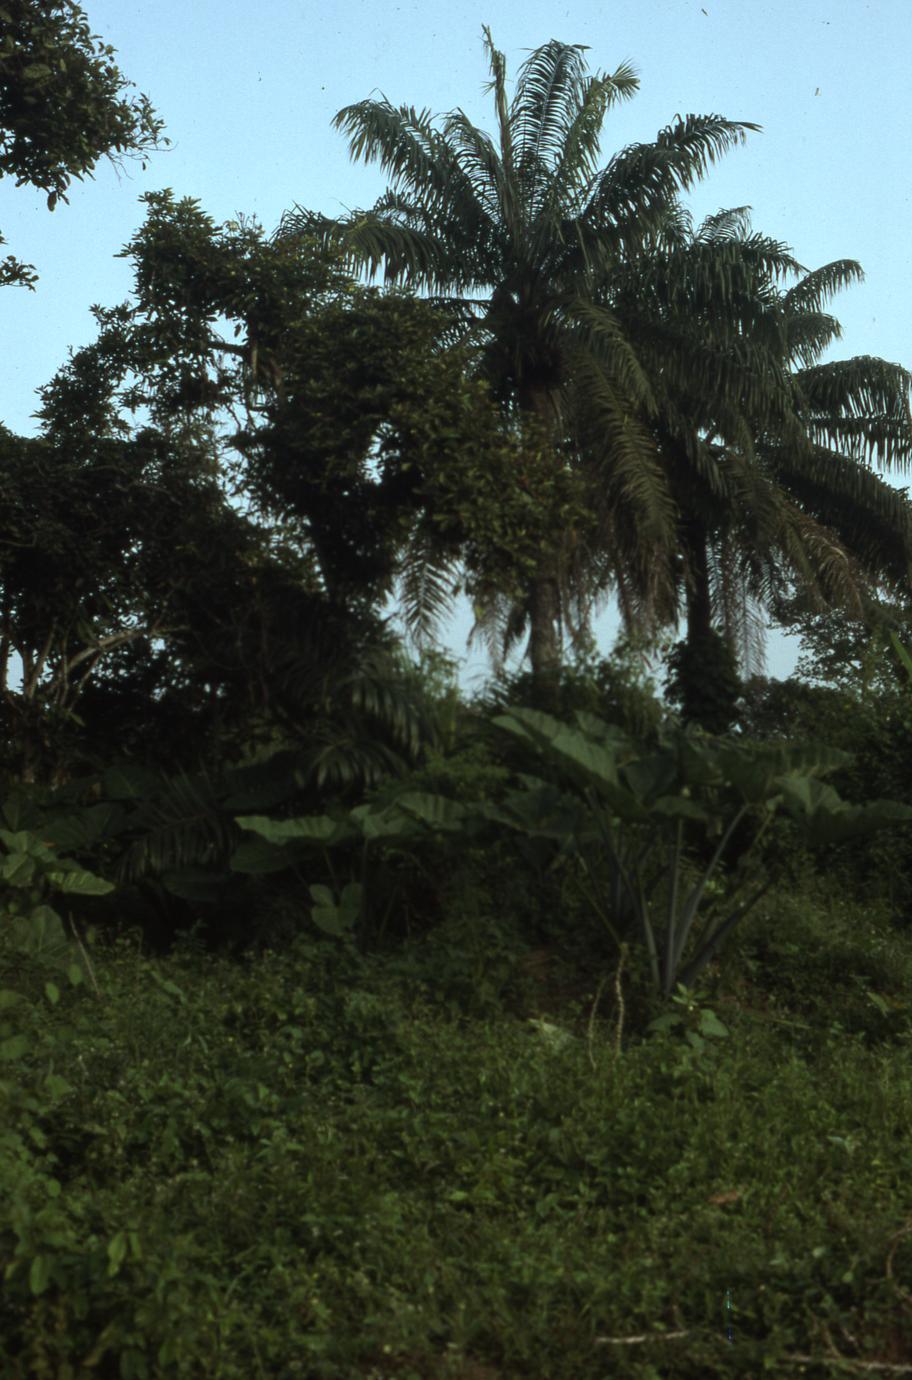 Palm trees in Oshogbo